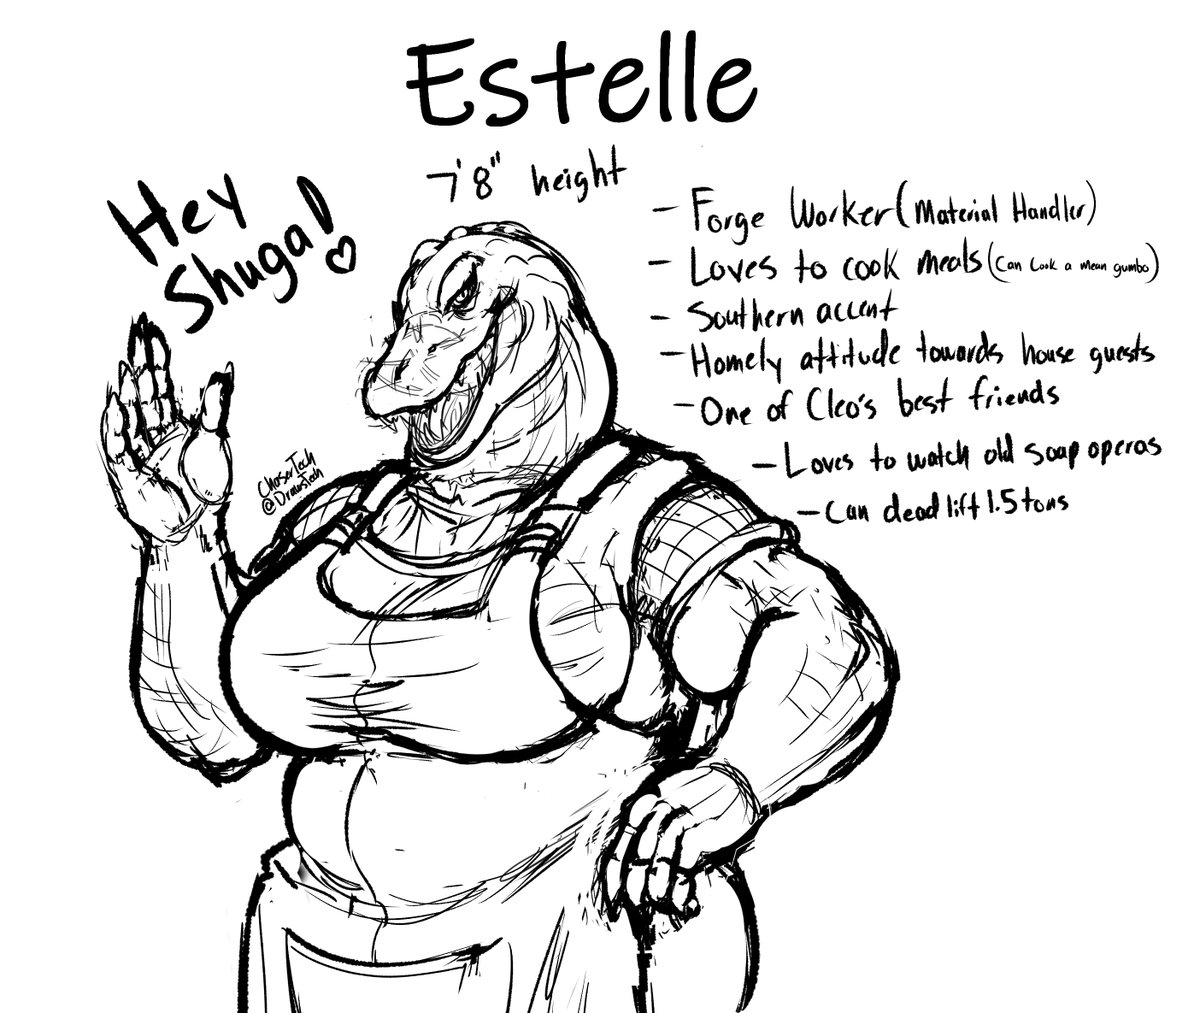 Sketch of my new Alligator character, Estelle!